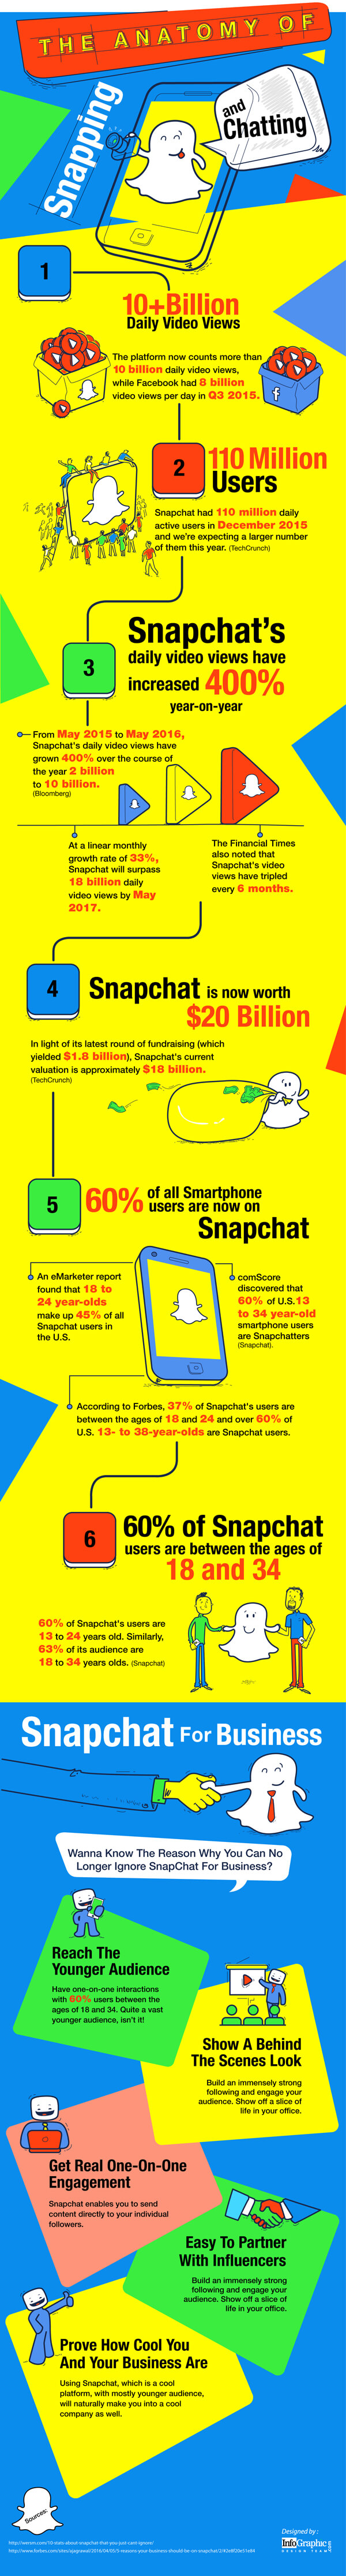 the-anatomy-of-snapping-and-chatting-infographic-plaza